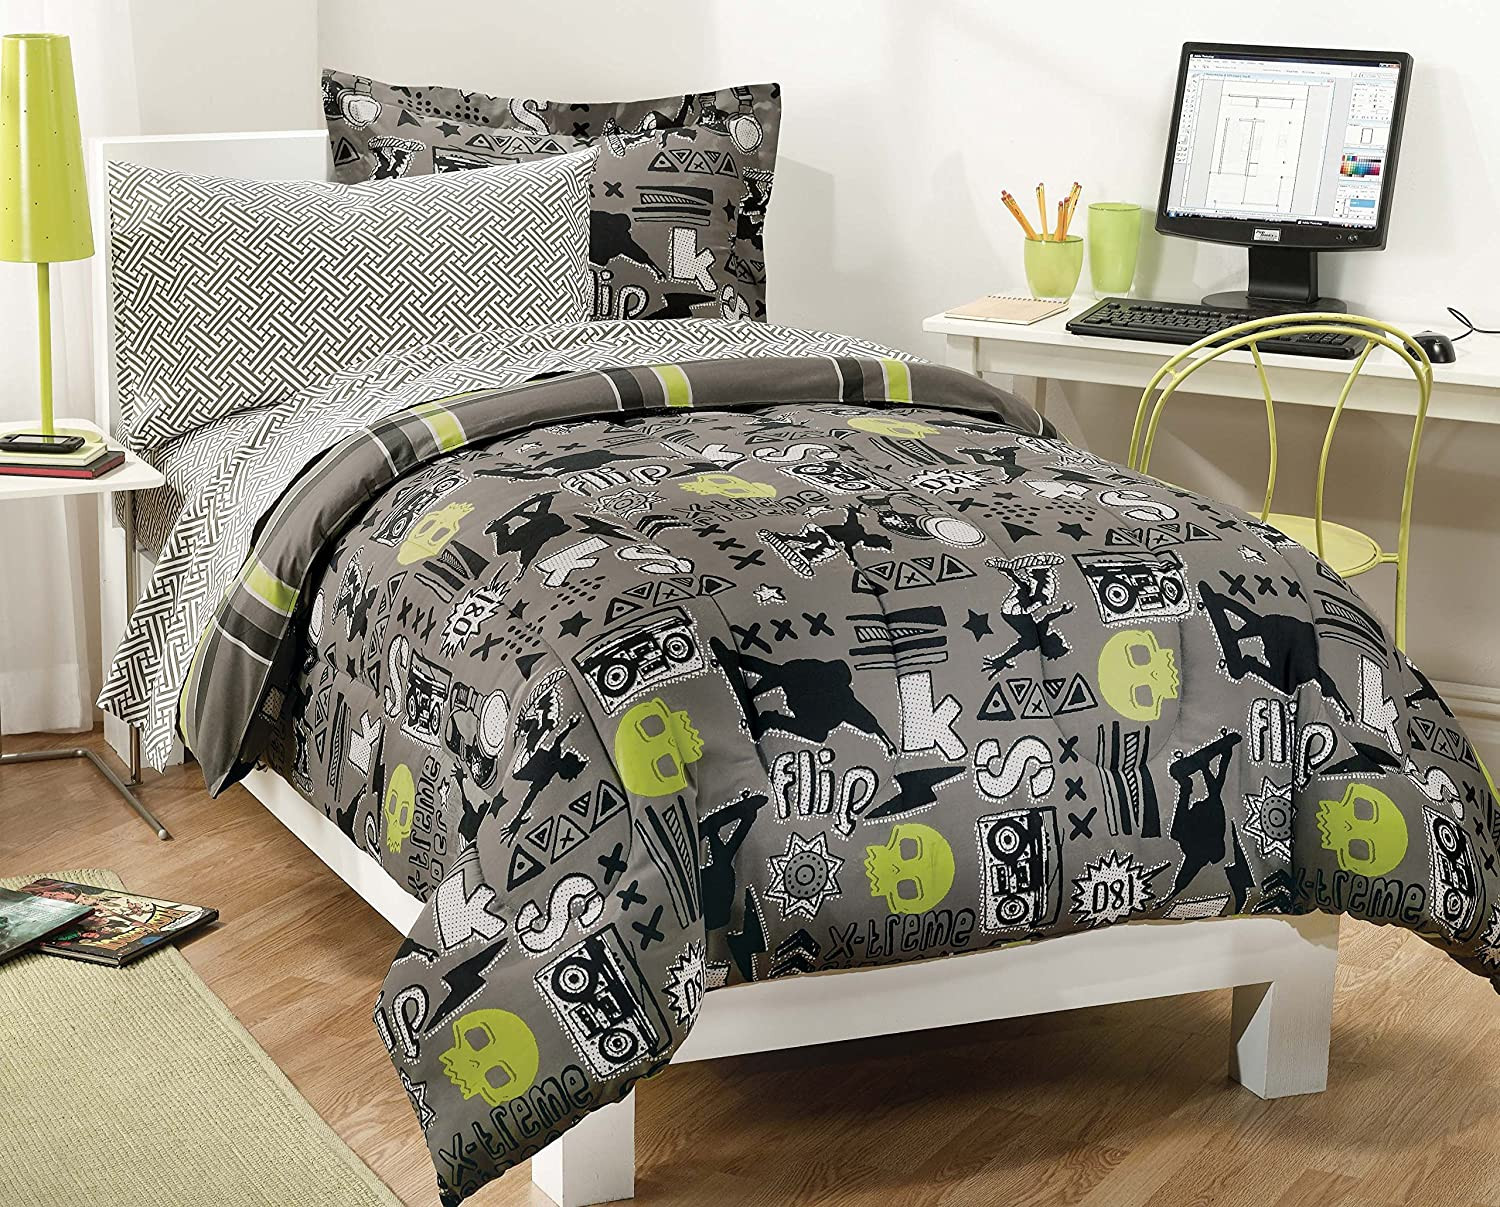 Cheap Boy Bedroom Sets
 Best Cheap Childrens and Teen Twin Boy or Girl Bedding Set